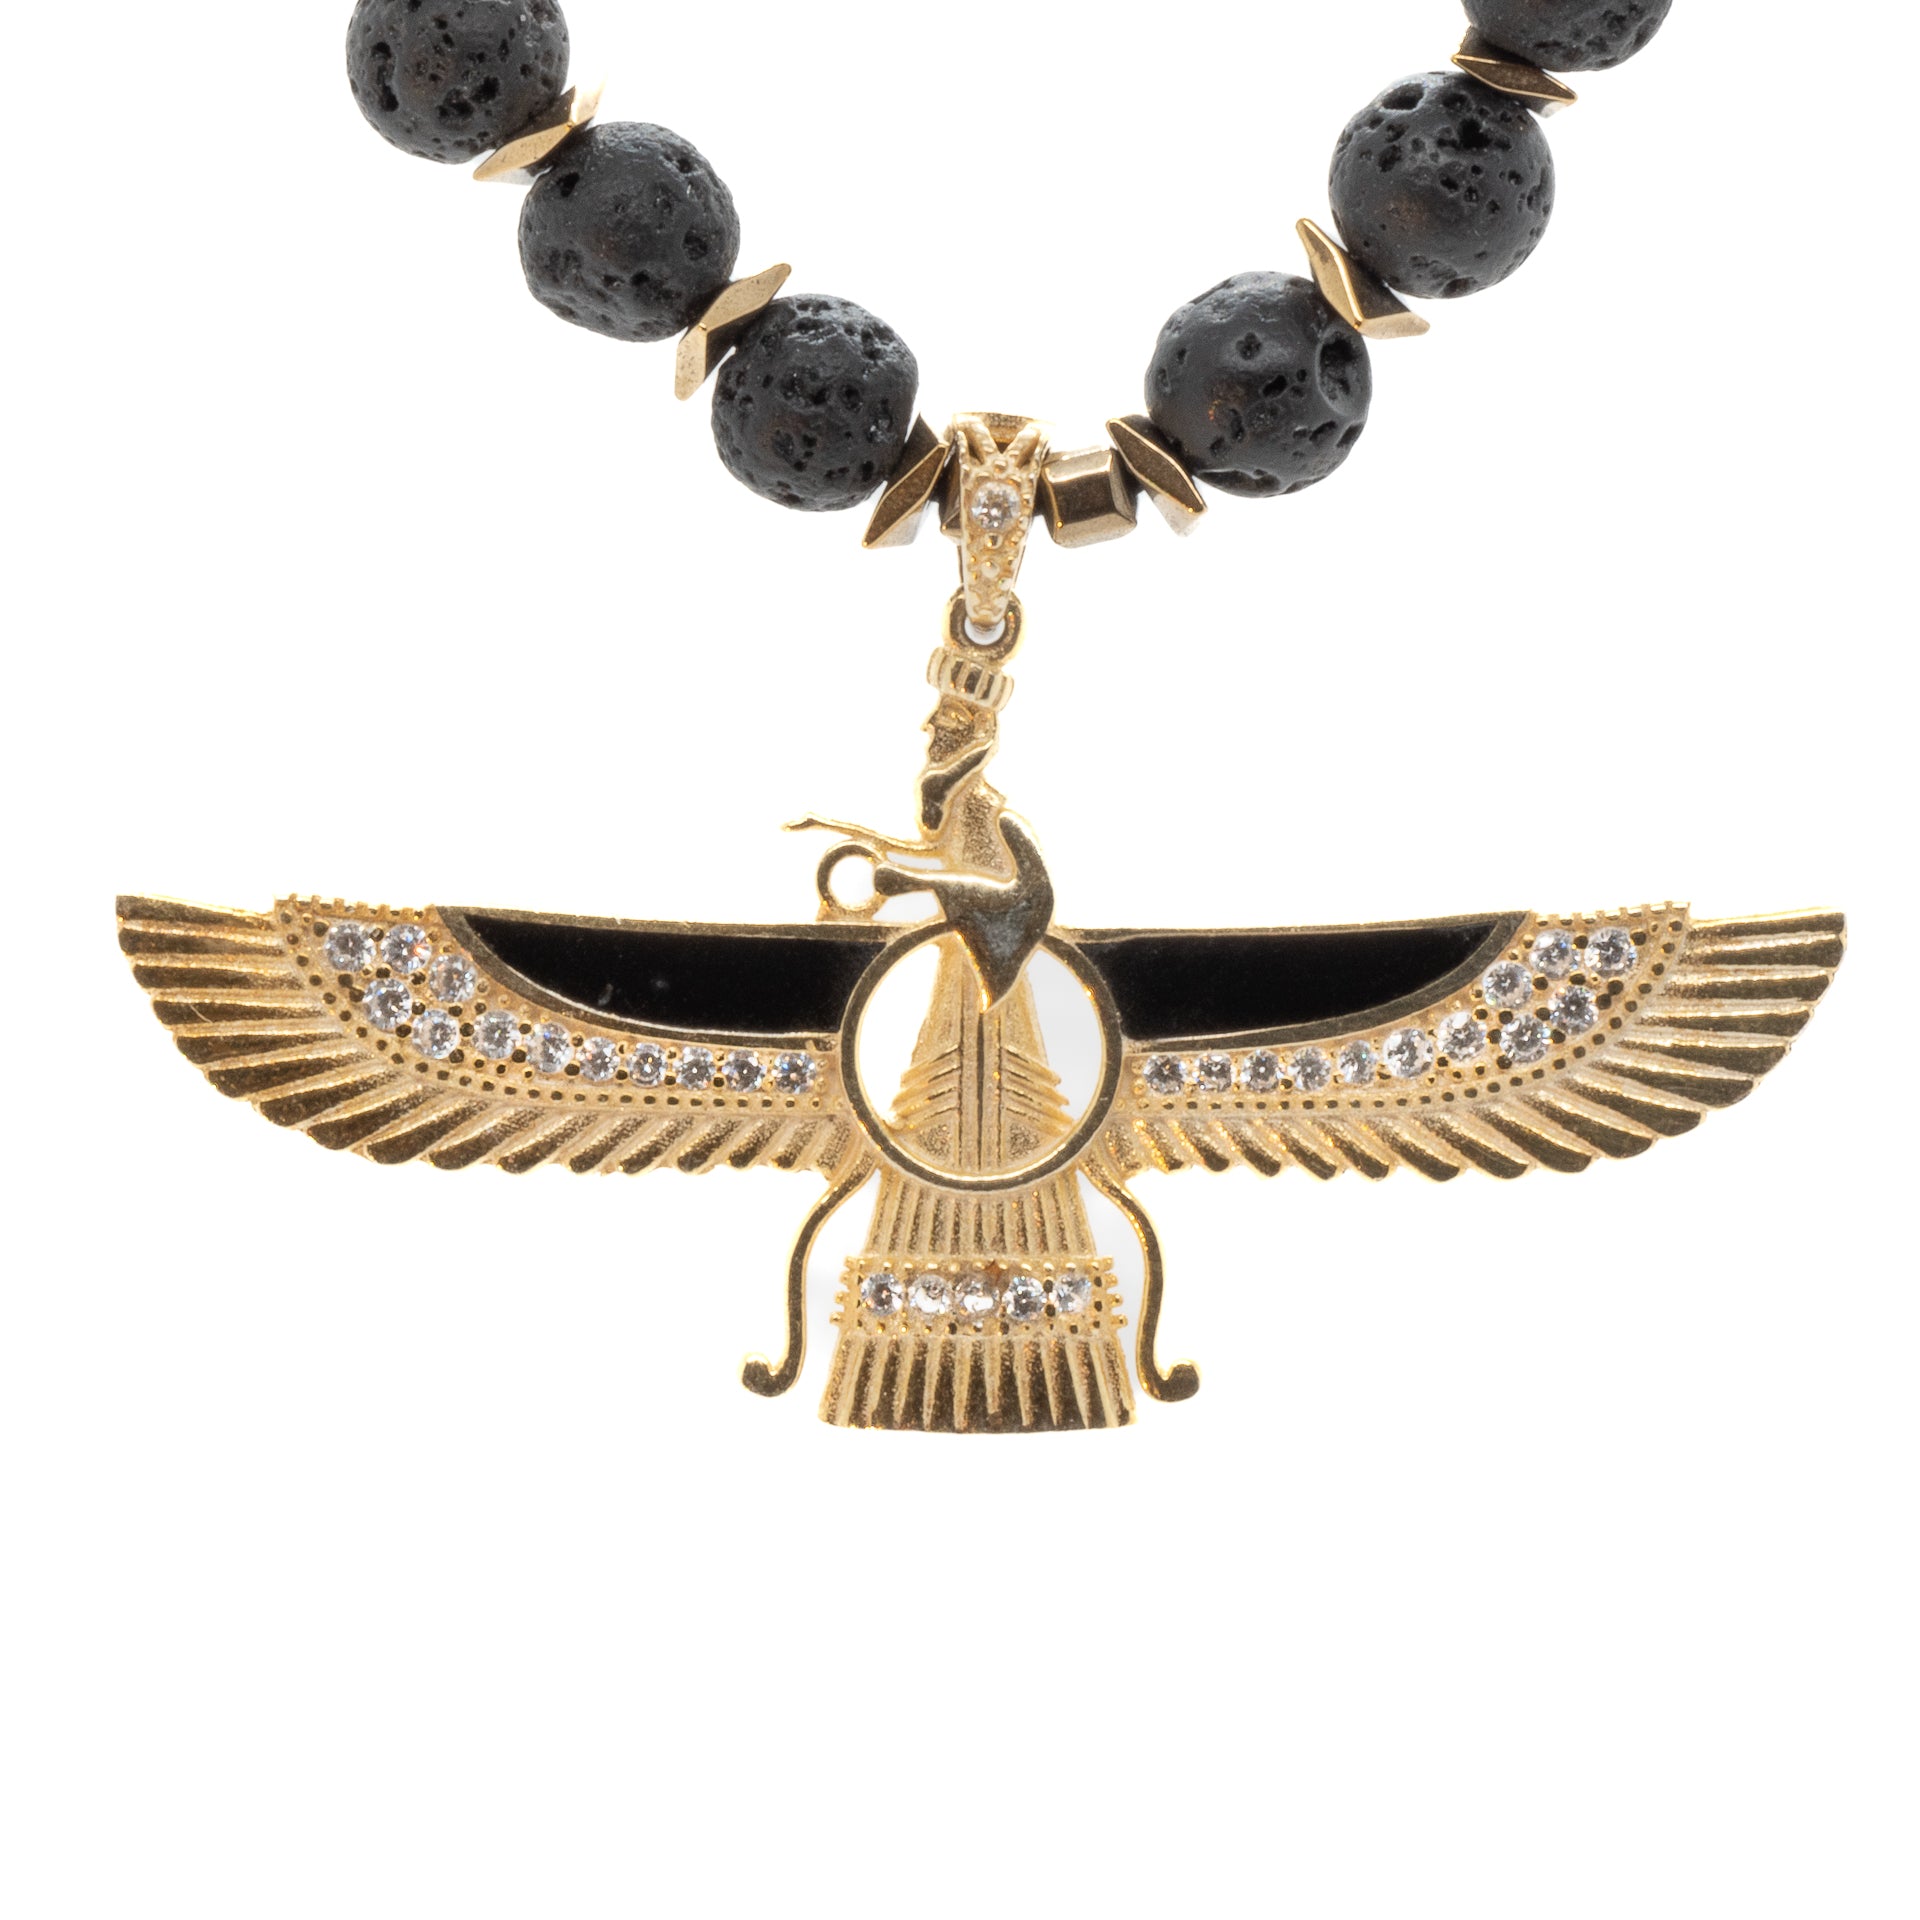 Faravahar Necklace for Divine Connection - Wear this symbol of power and divine guidance.